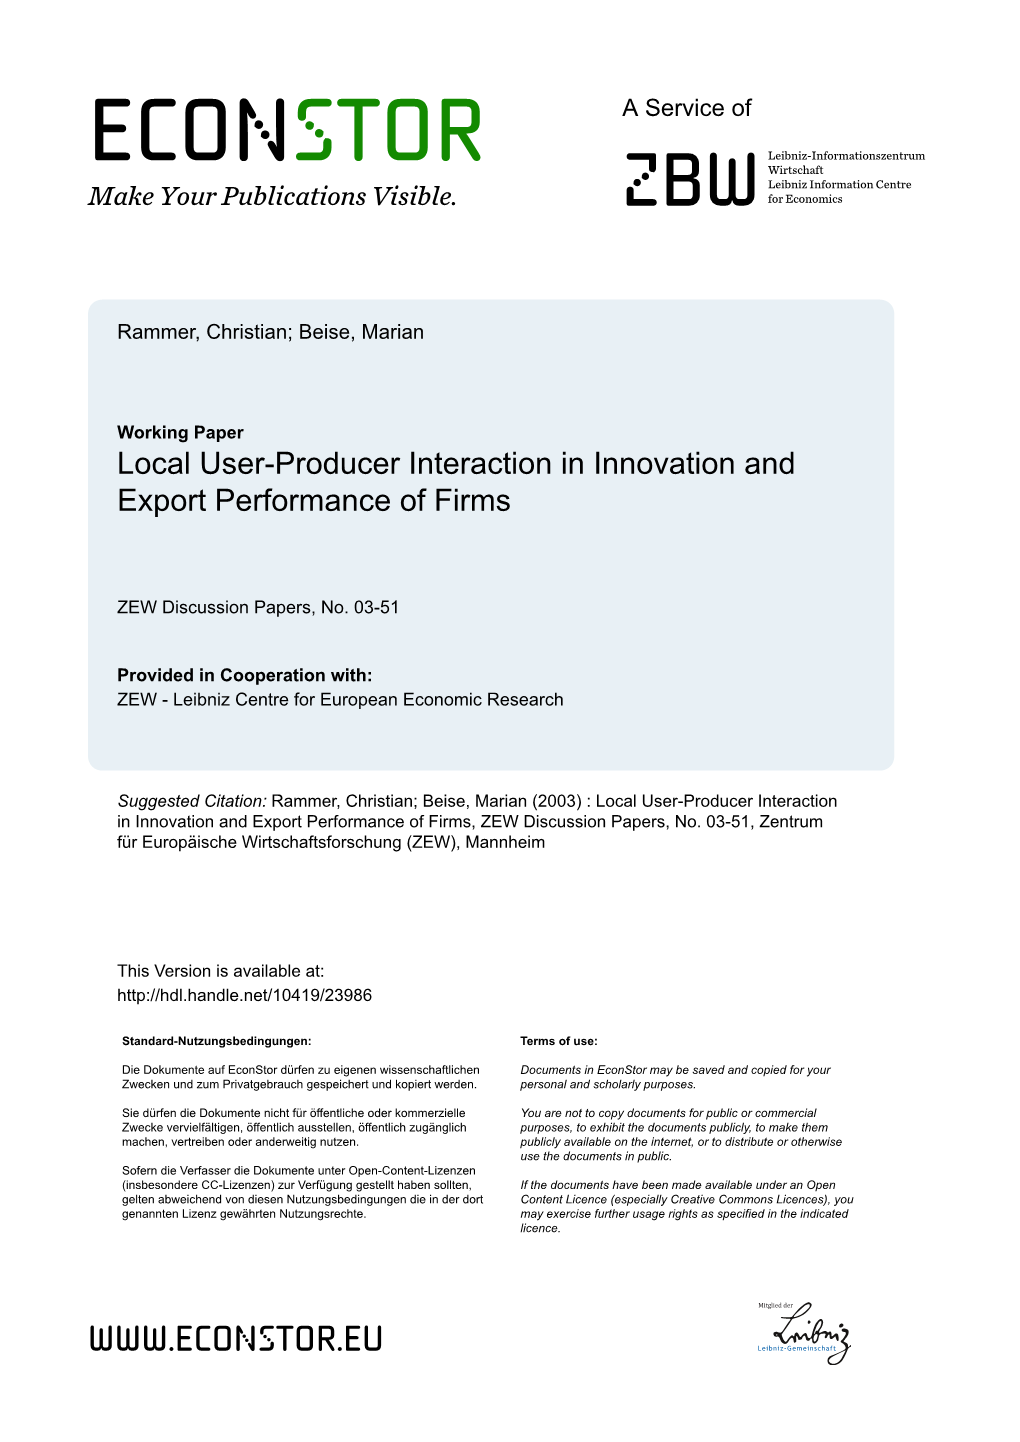 Local User-Producer Interaction in Innovation and Export Performance of Firms